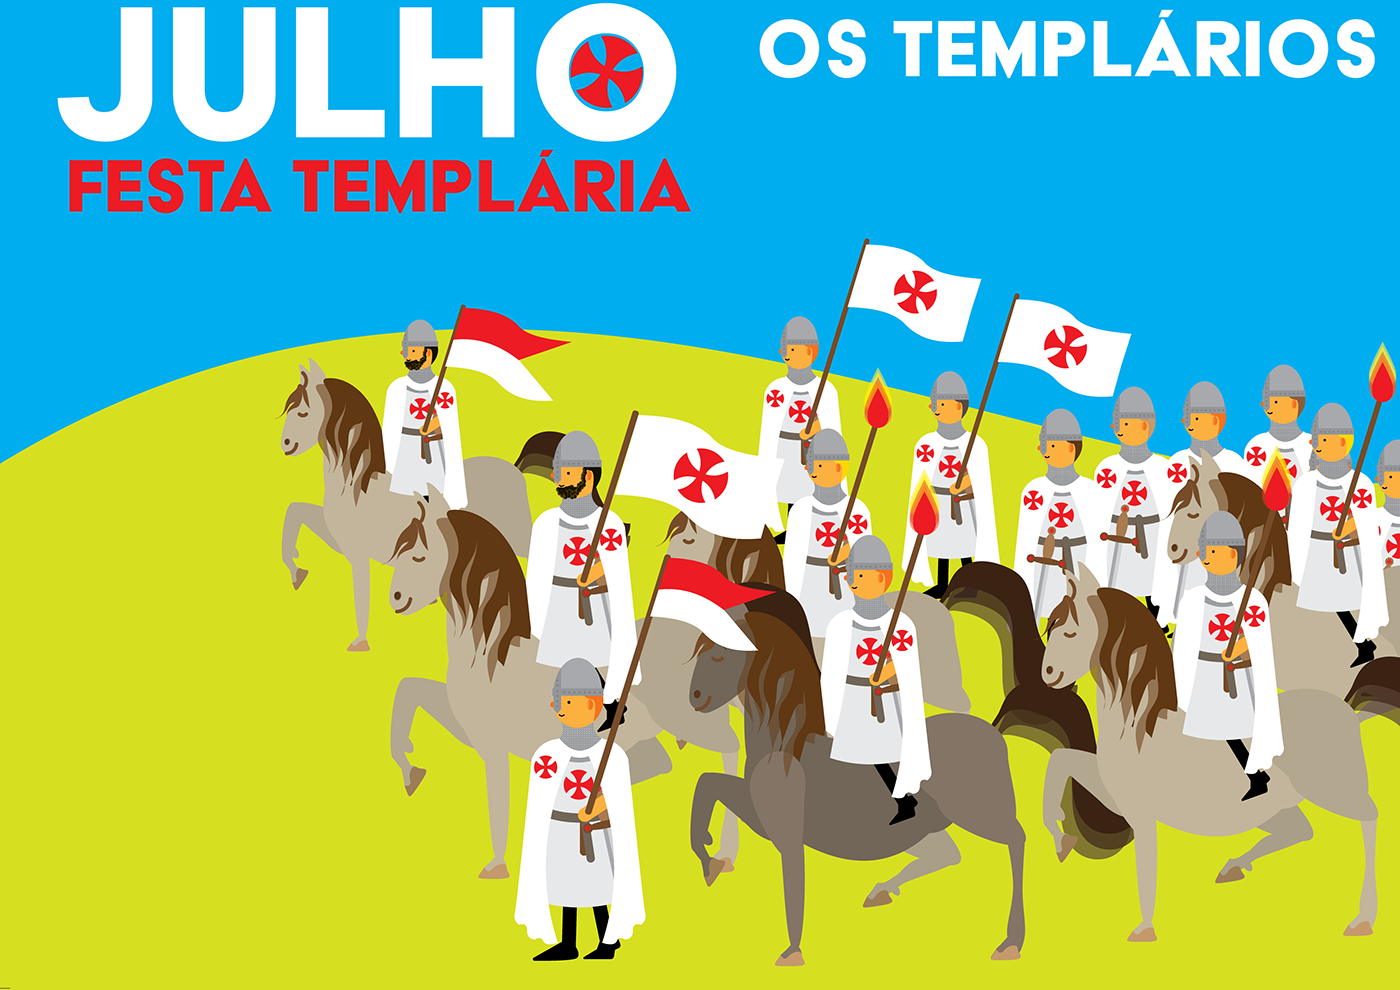 This is a project for the City Hall of Tomar, about the Templar Feast in July